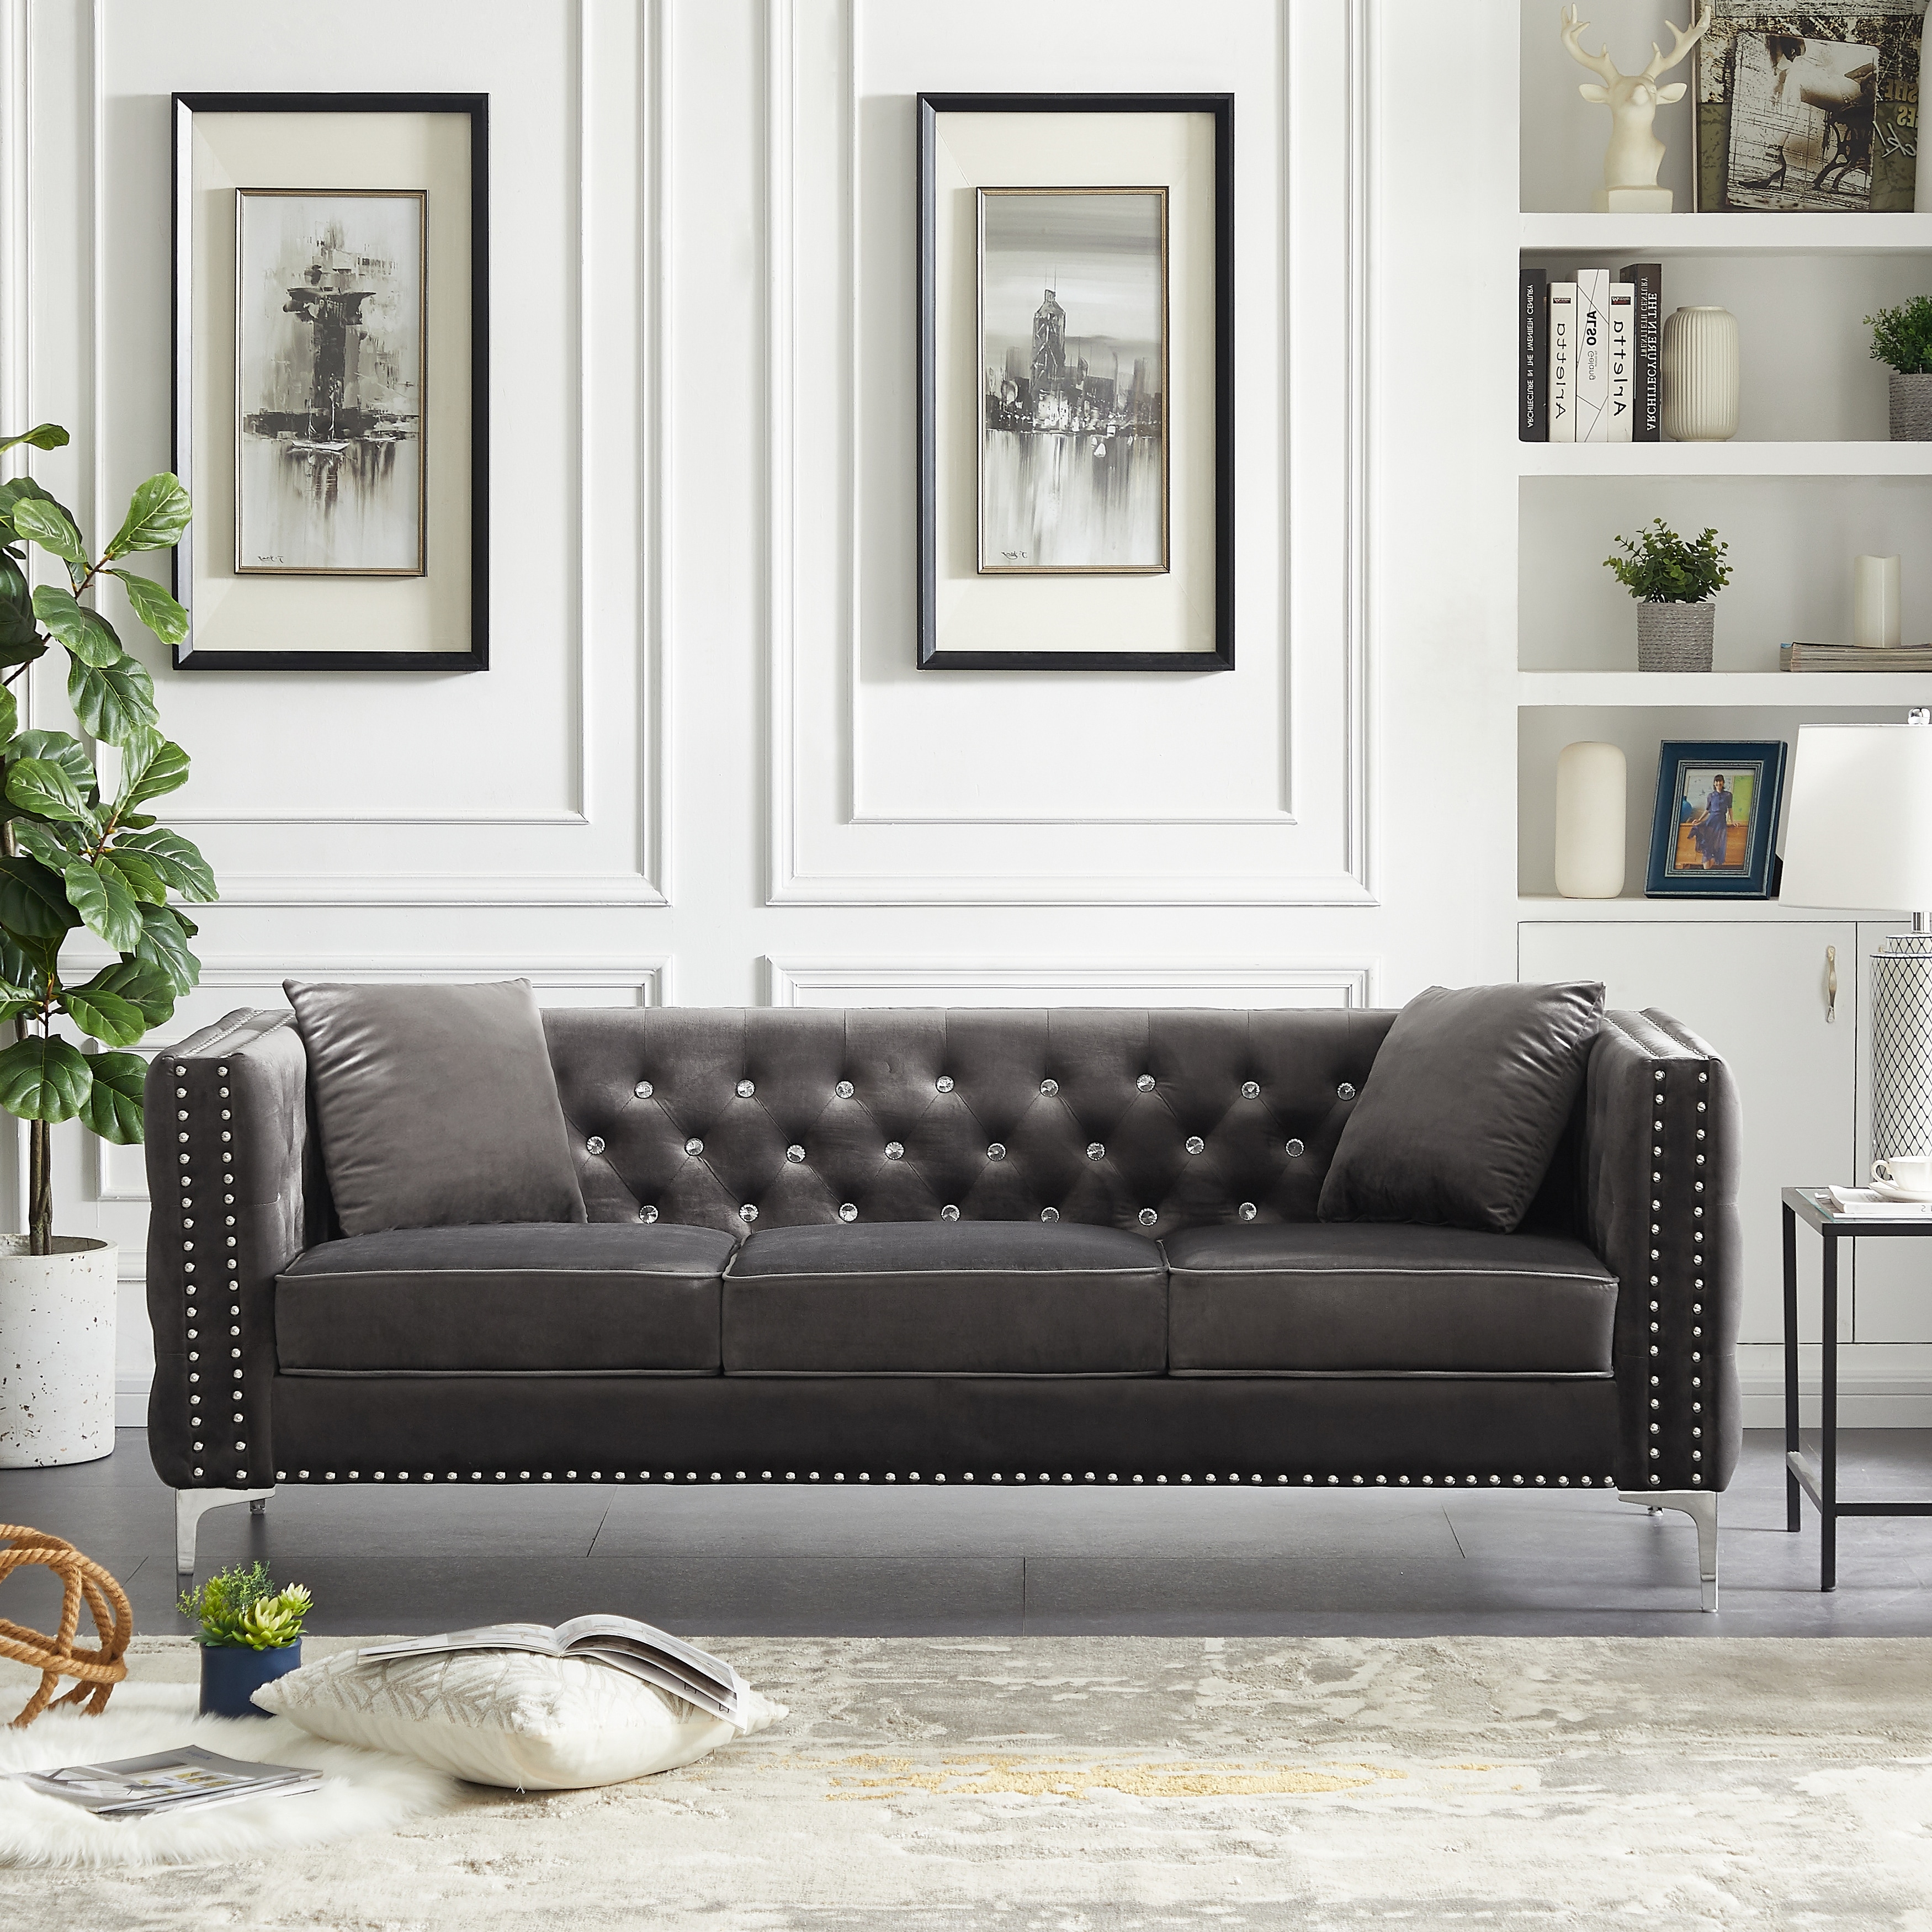 https://ak1.ostkcdn.com/images/products/is/images/direct/ef77bf15ea4c2b749e9855cf8dc579c438ef35a0/Button-Tufted-Velvet-Sofa-with-Square-Arm-Couch-and-2-Pillows%2C-3-Seater-Couch-with-Removable-Seat-Cushions-for-Living-Room%2C-Grey.jpg